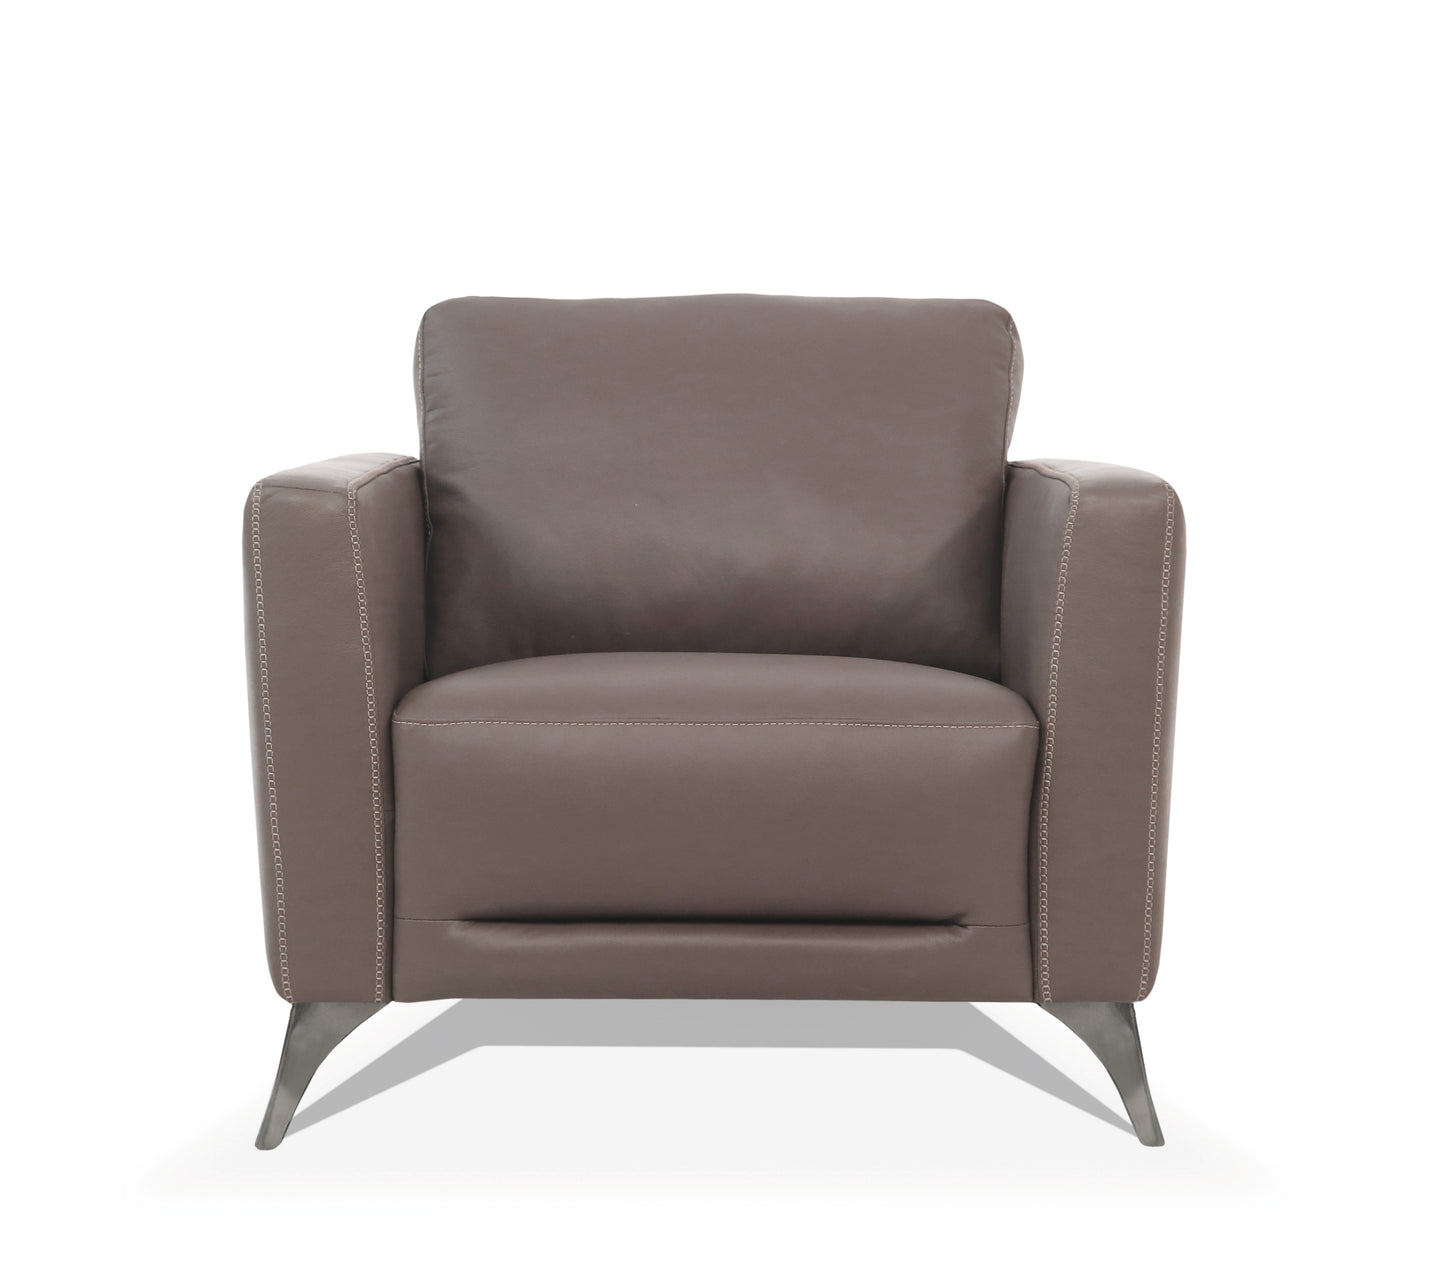 Malaga Taupe Leather Chair